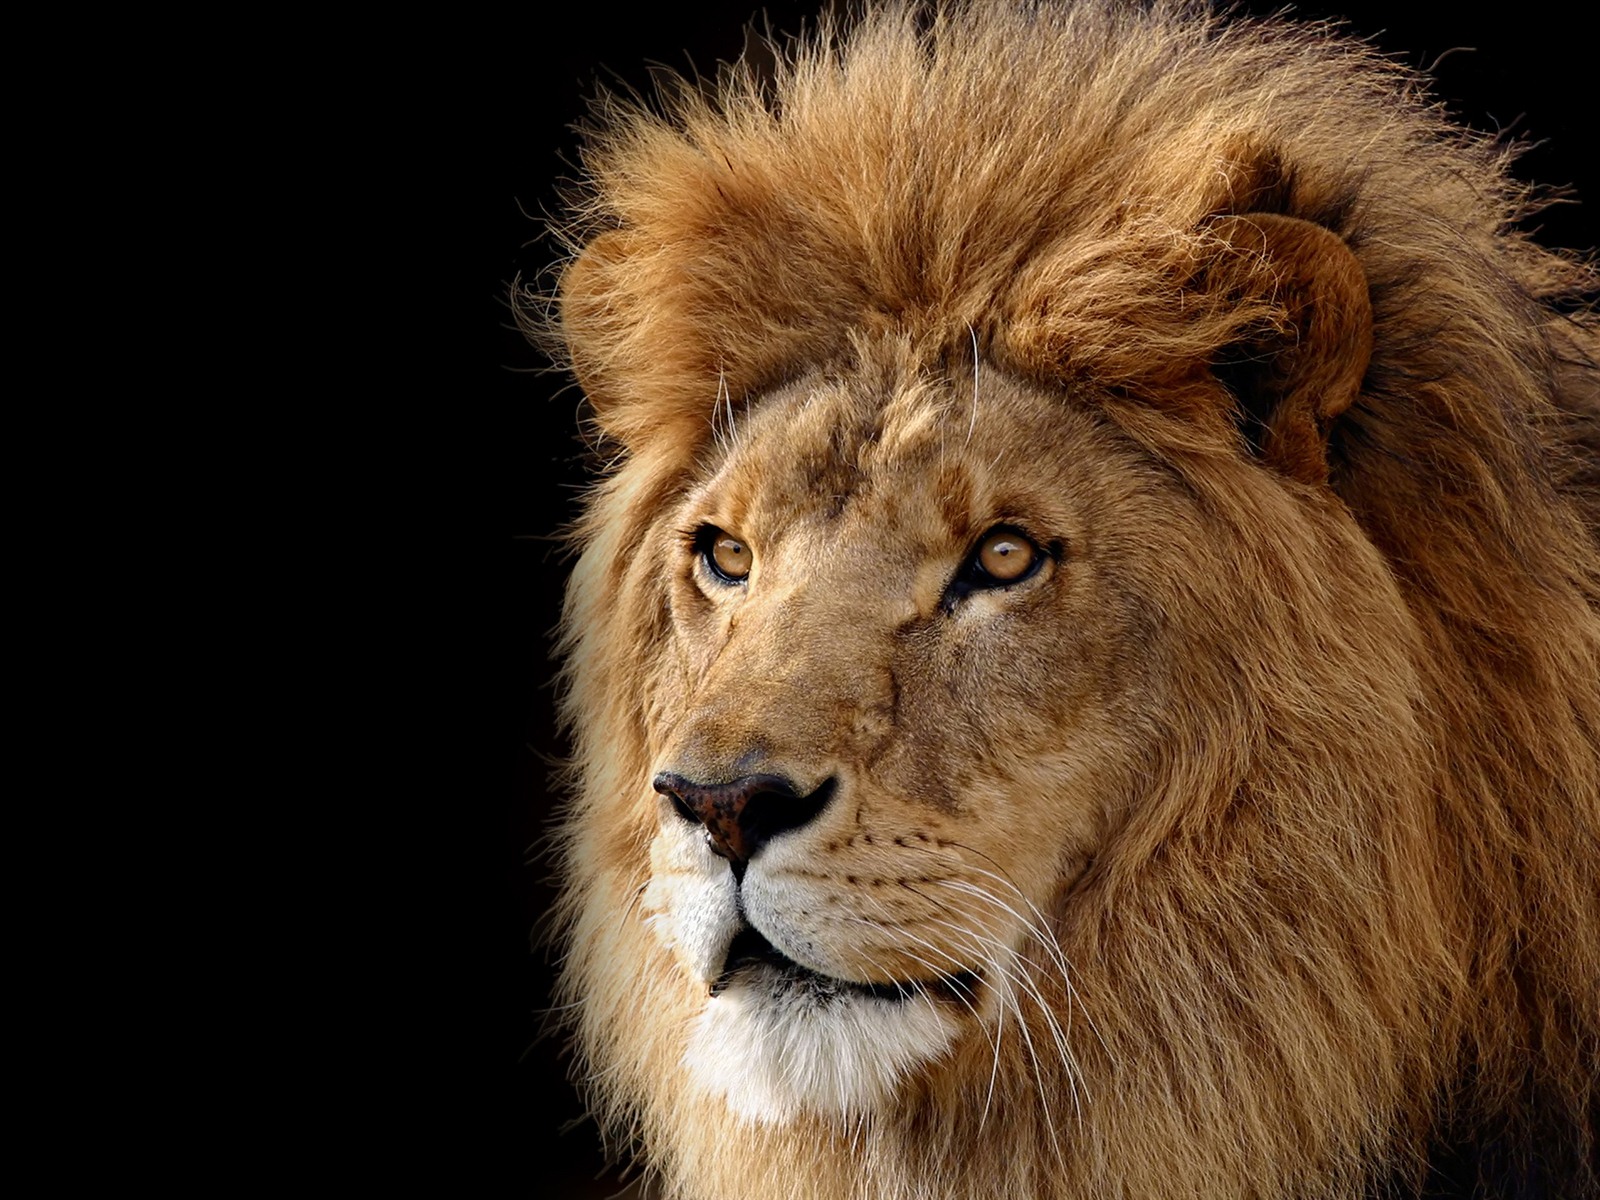 Mac OS X the Lion Apple systems official HD wallpapers #14 - 1600x1200